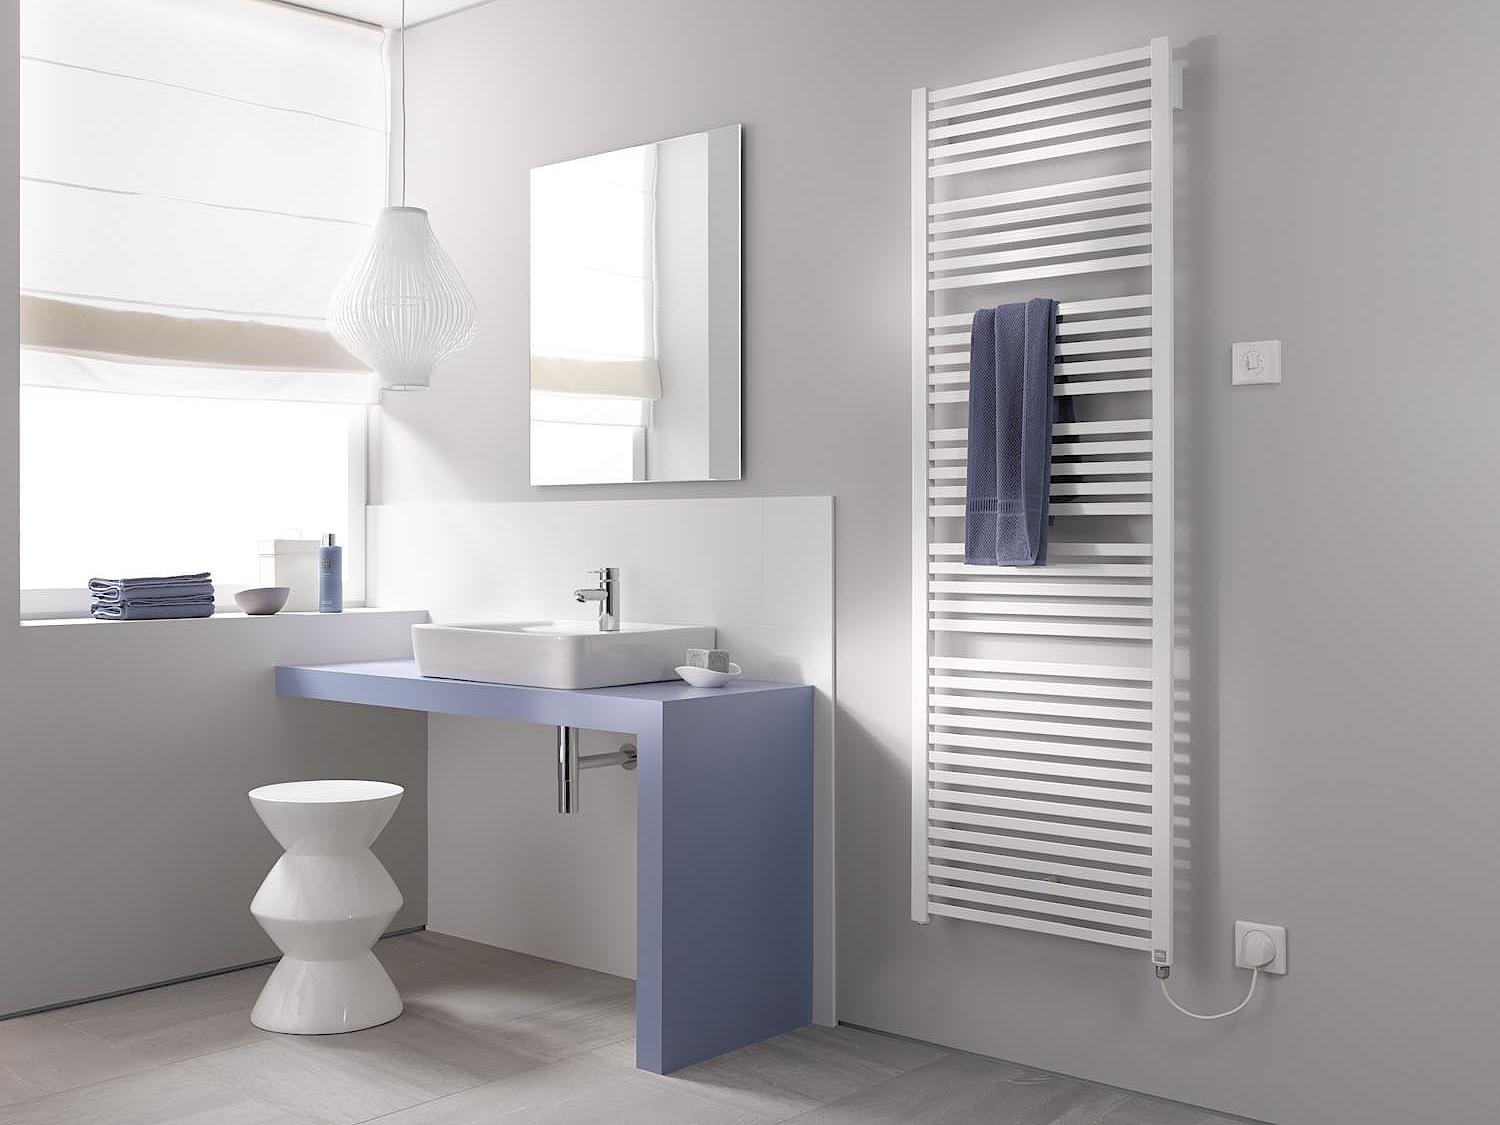 The Kermi Geneo quadris designer and bathroom radiator is also available in an electric version.